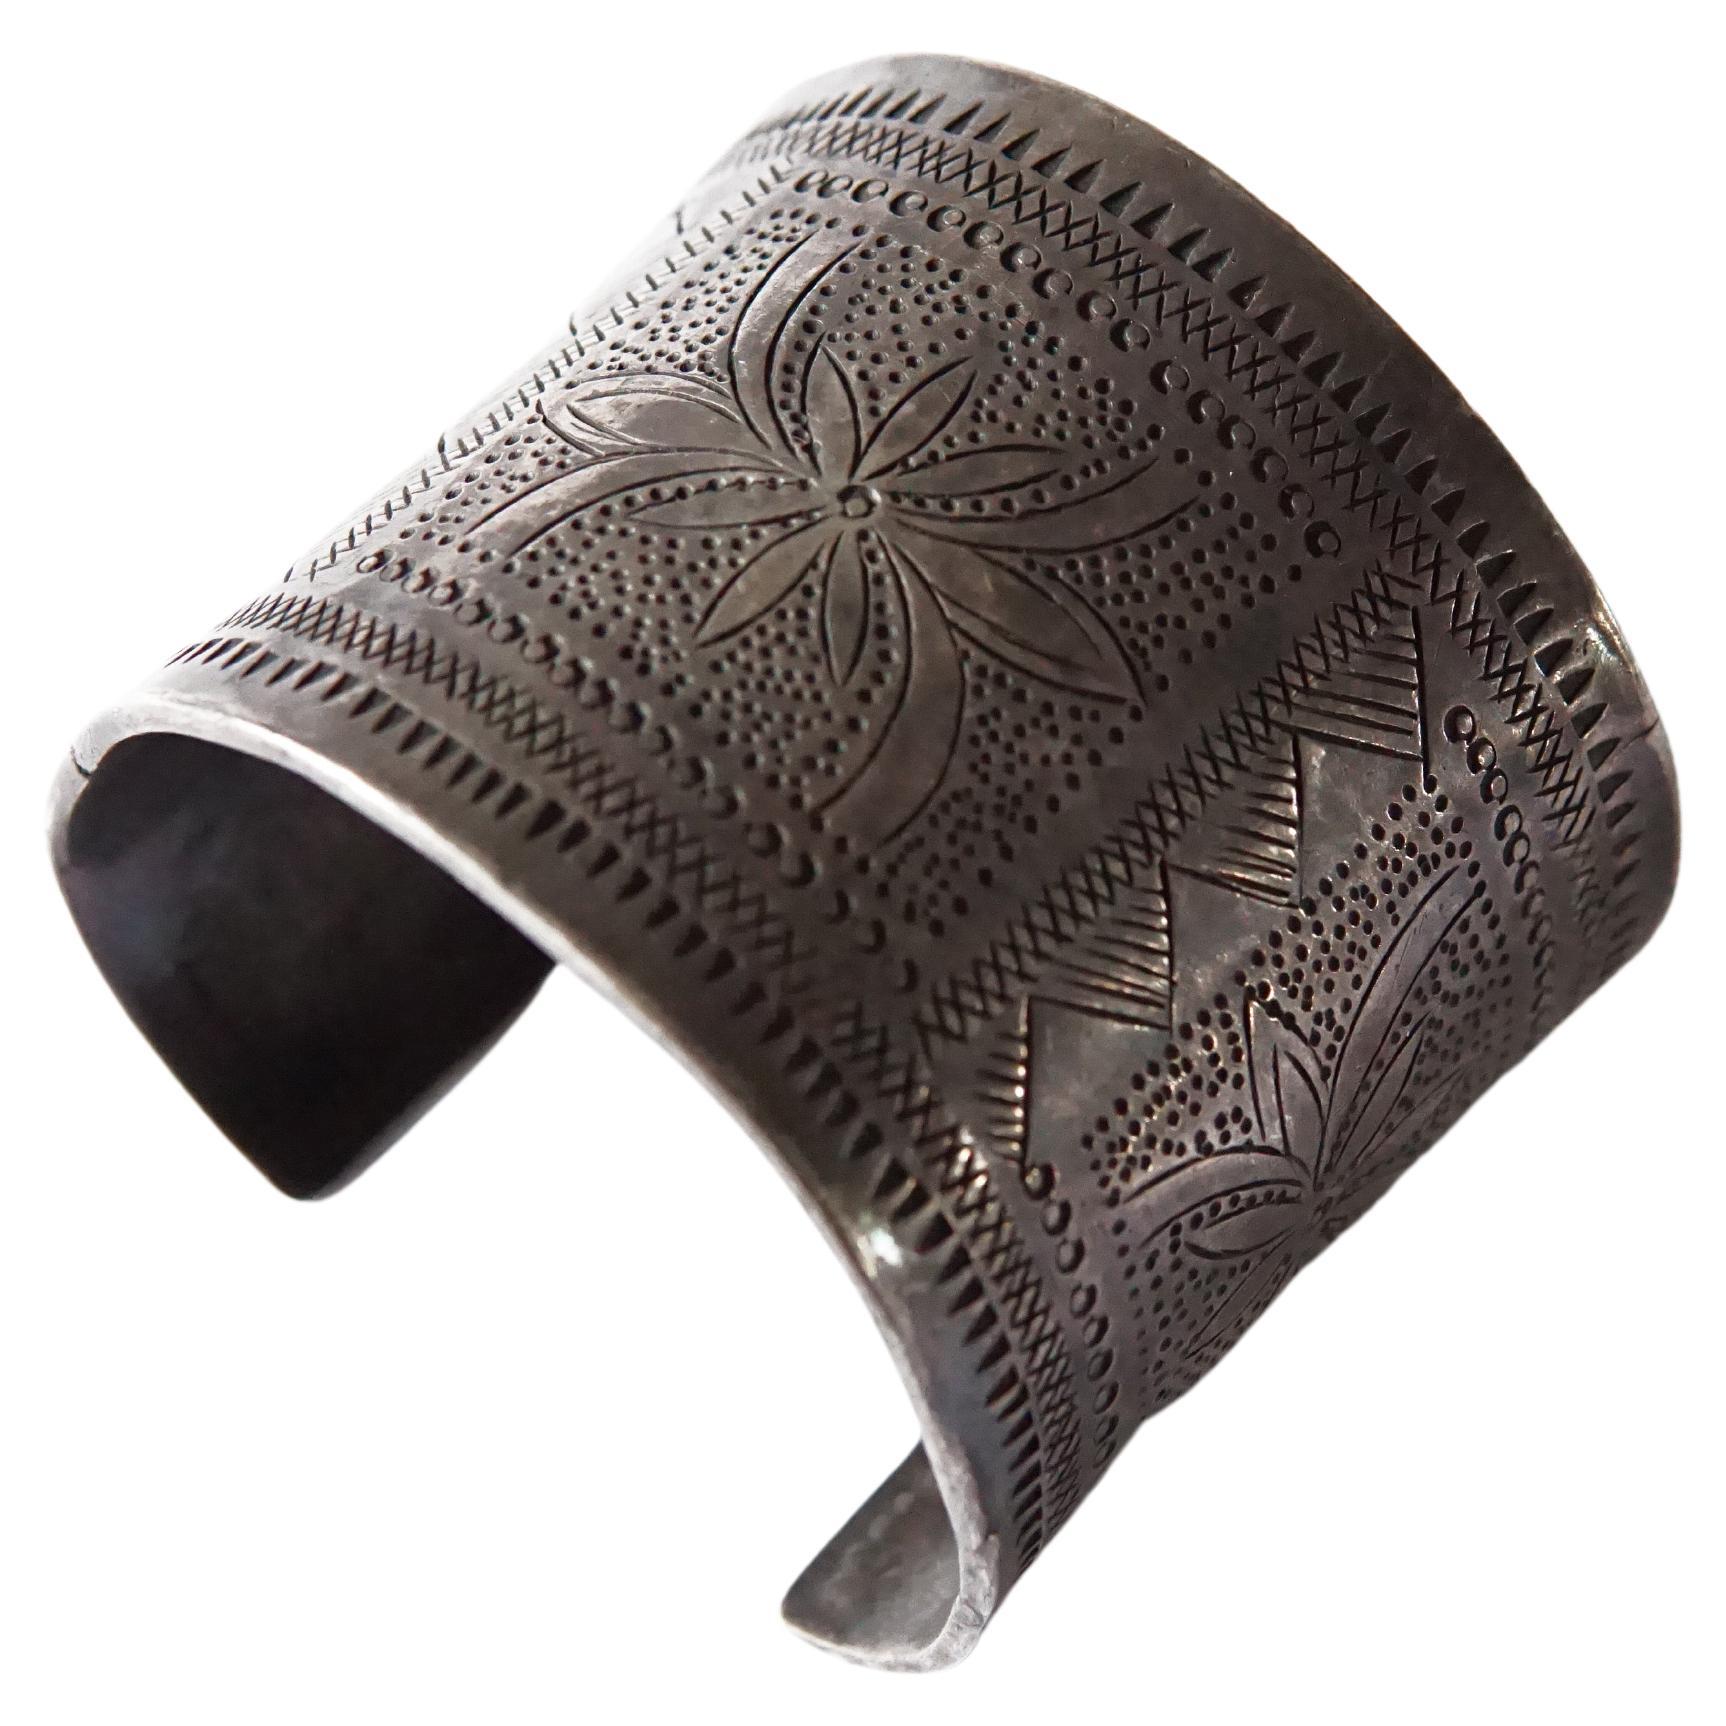 Antique Thai Hill Tribe Cuff Bracelet with Engraved Tribal Patterns